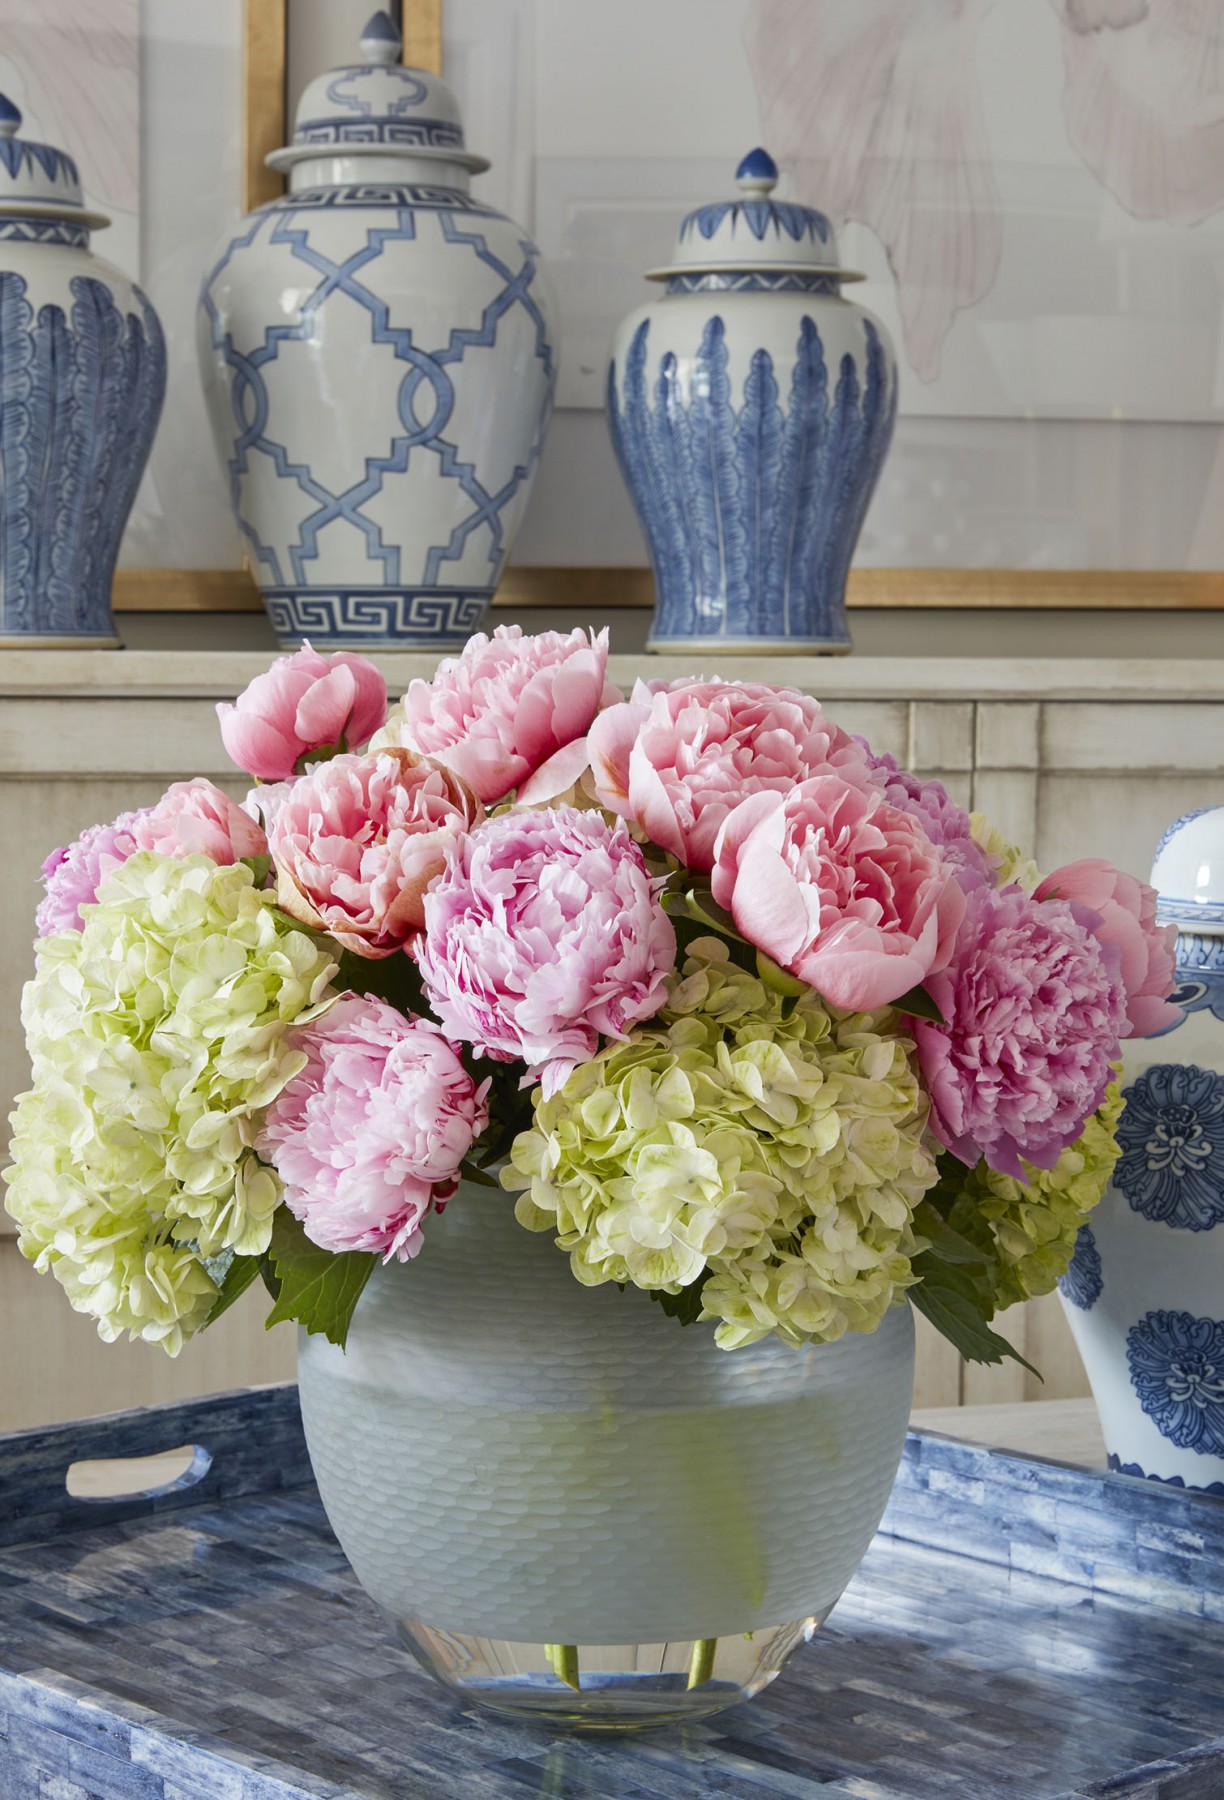 Renny & Reed created this arrangement of pink peonies and lime hydrangeas